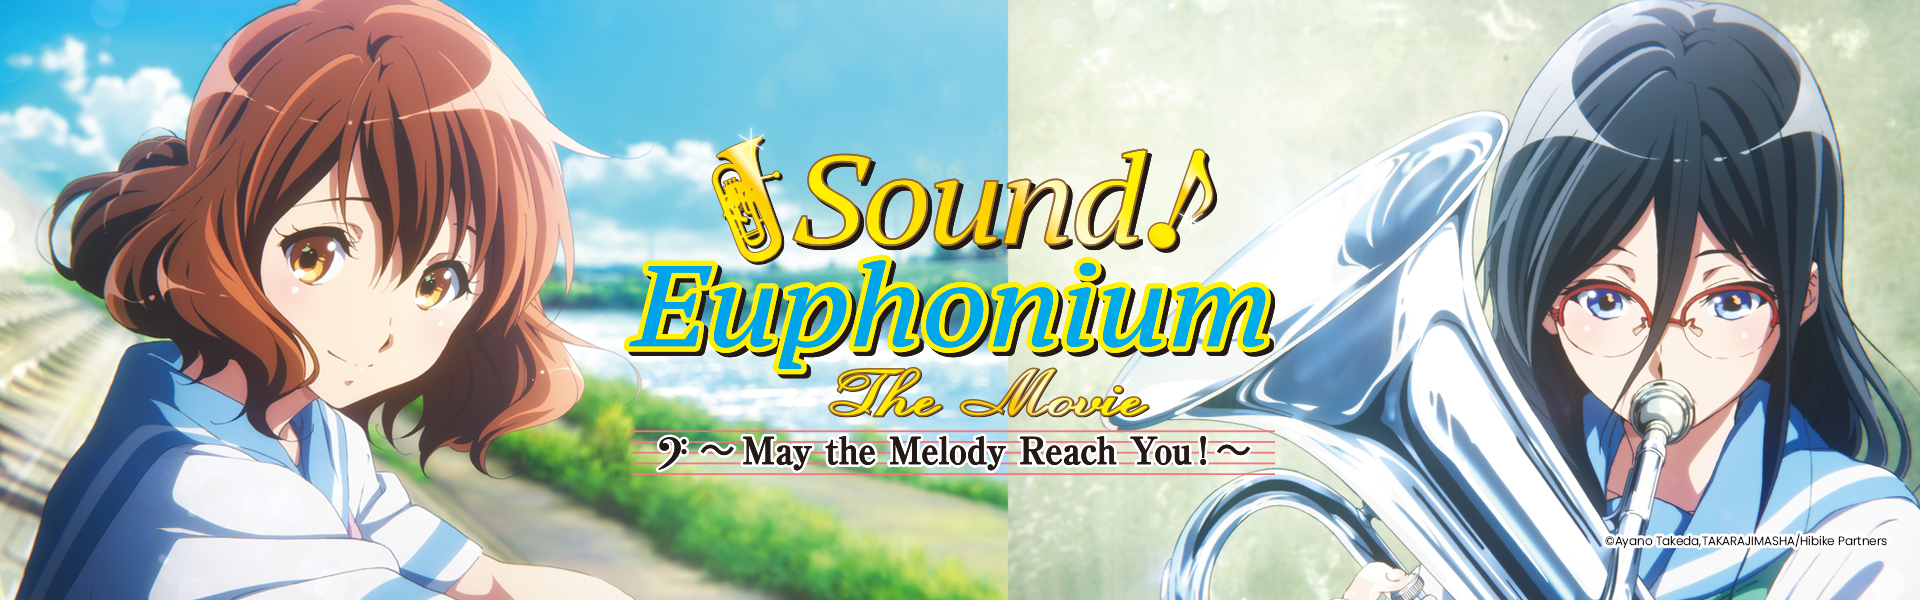 Sound! Euphonium, the Movie -May the Melody Reach You!-